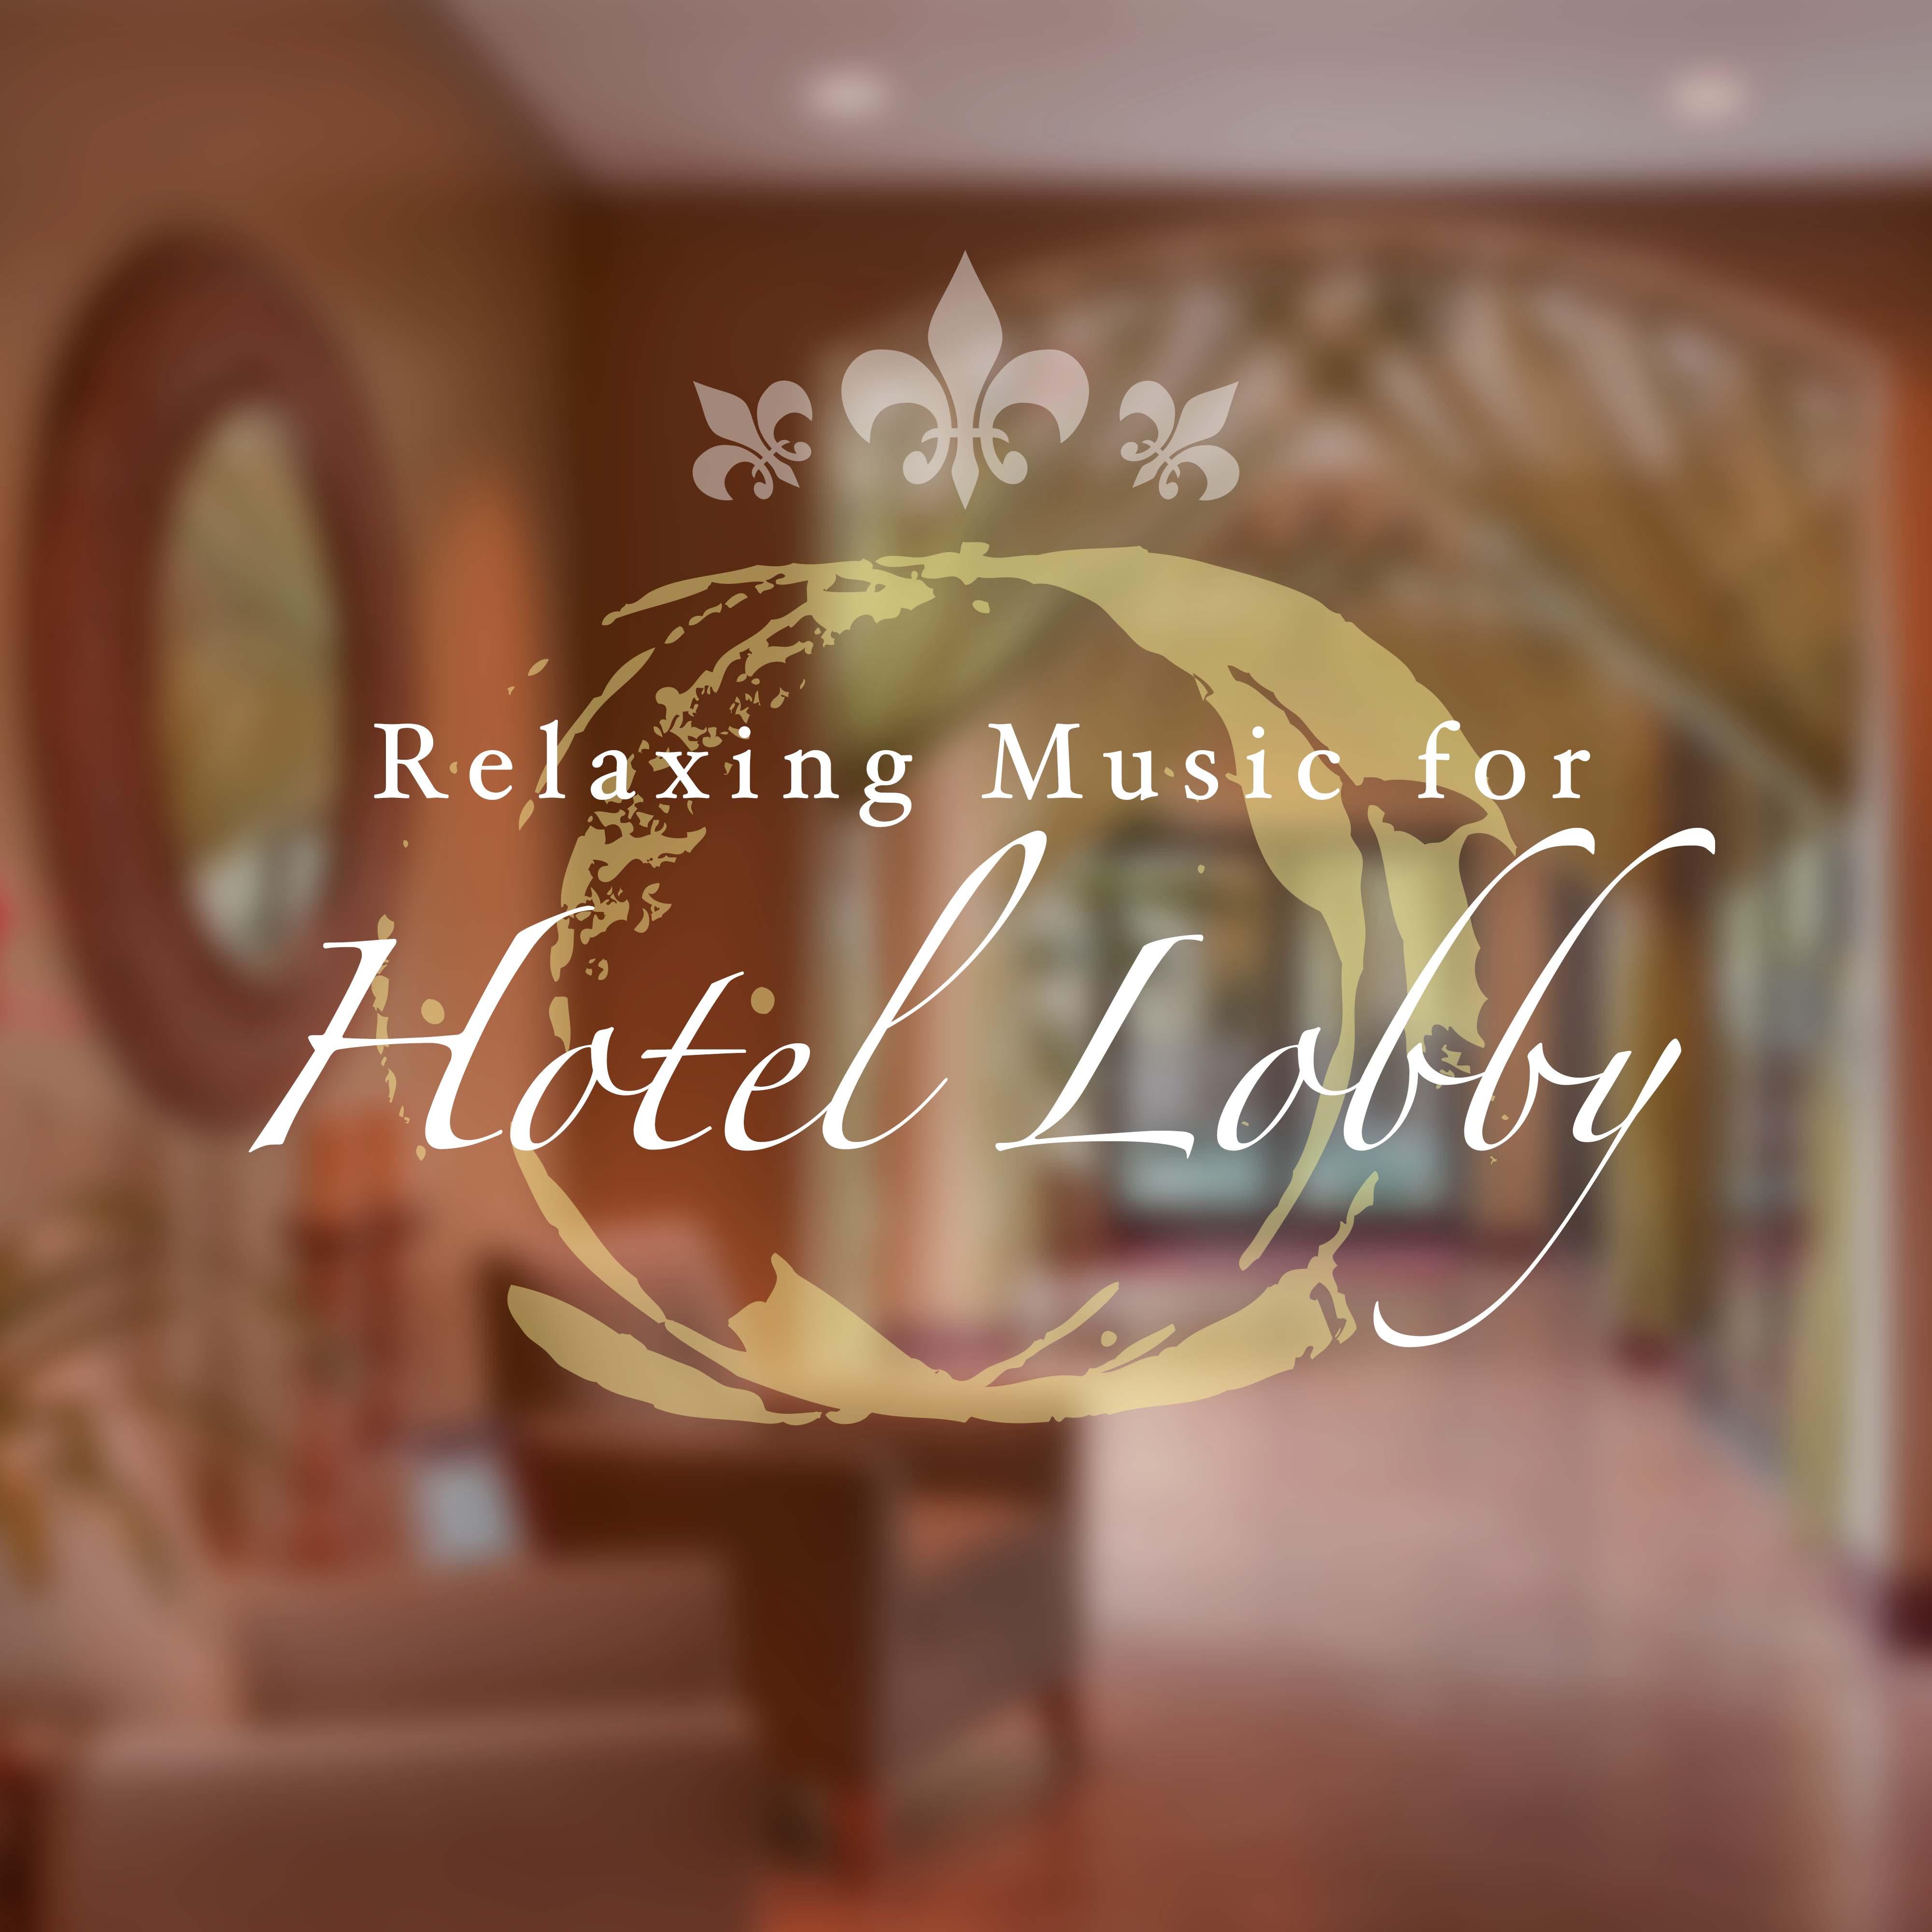 Relaxing Music for Hotel Lobby - The Specialists of Ambient Background Soundscapes